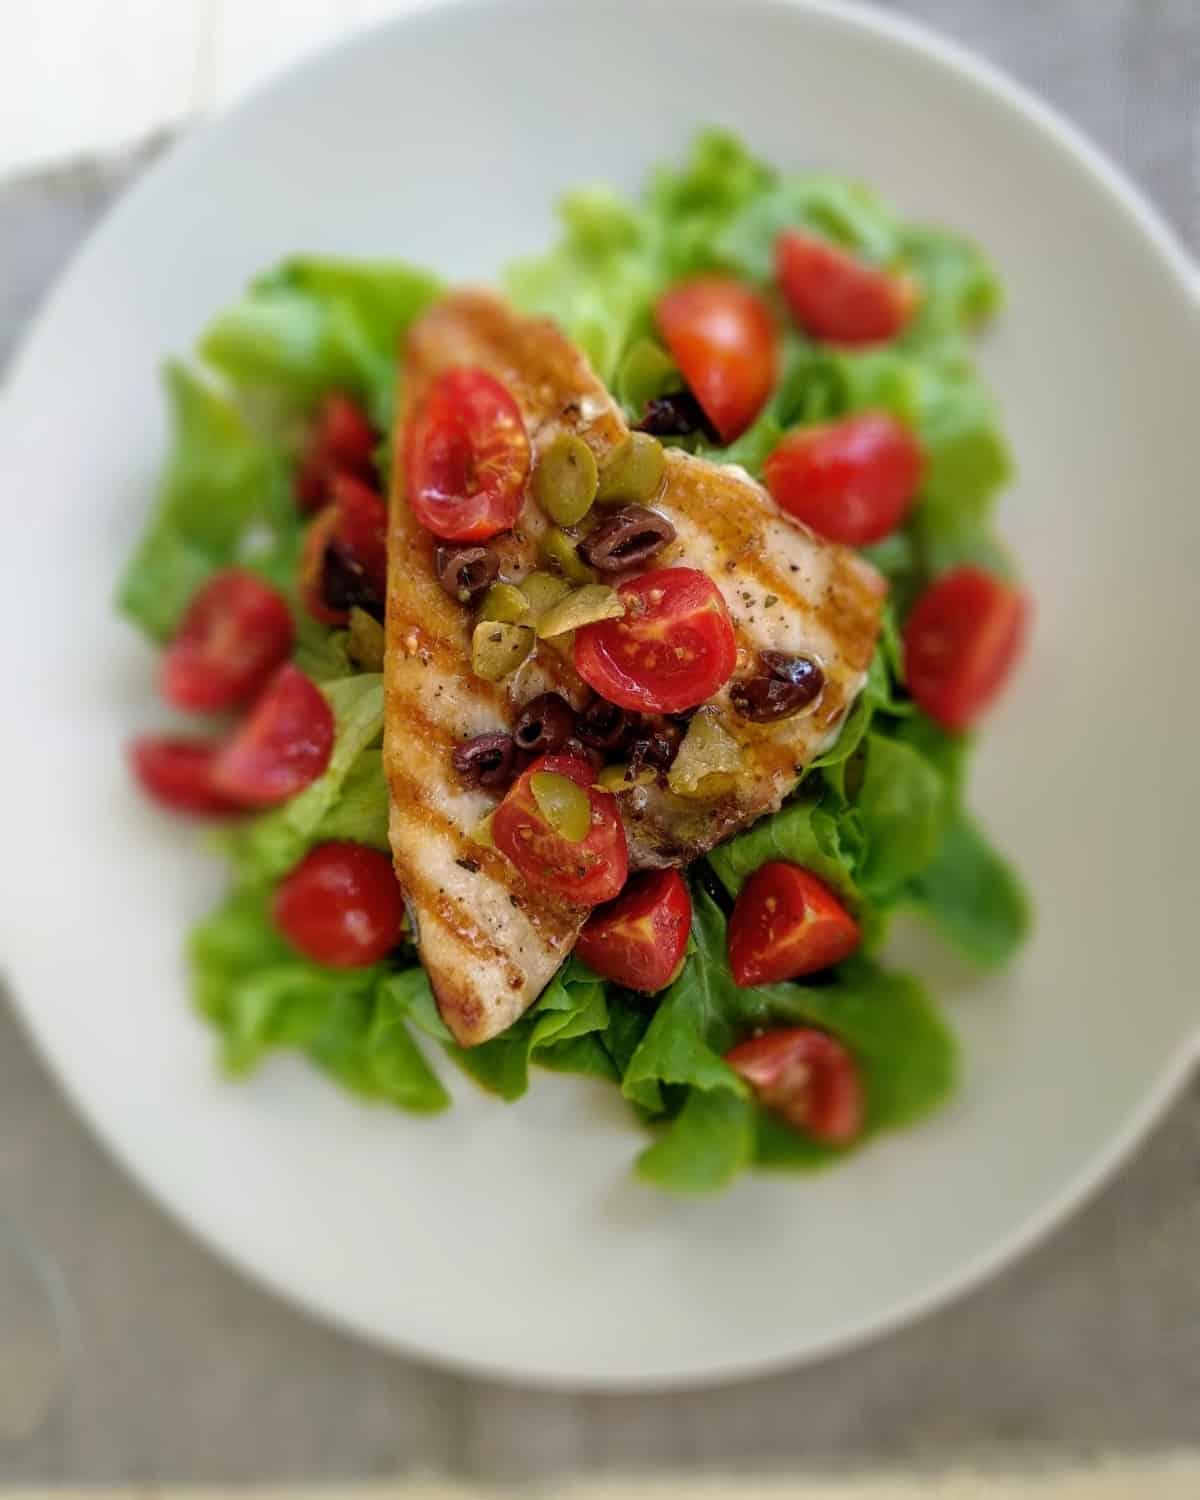 A Grilled-Swordfish  on a white plate. It is garnished with chopped tomatoes, olives and salad